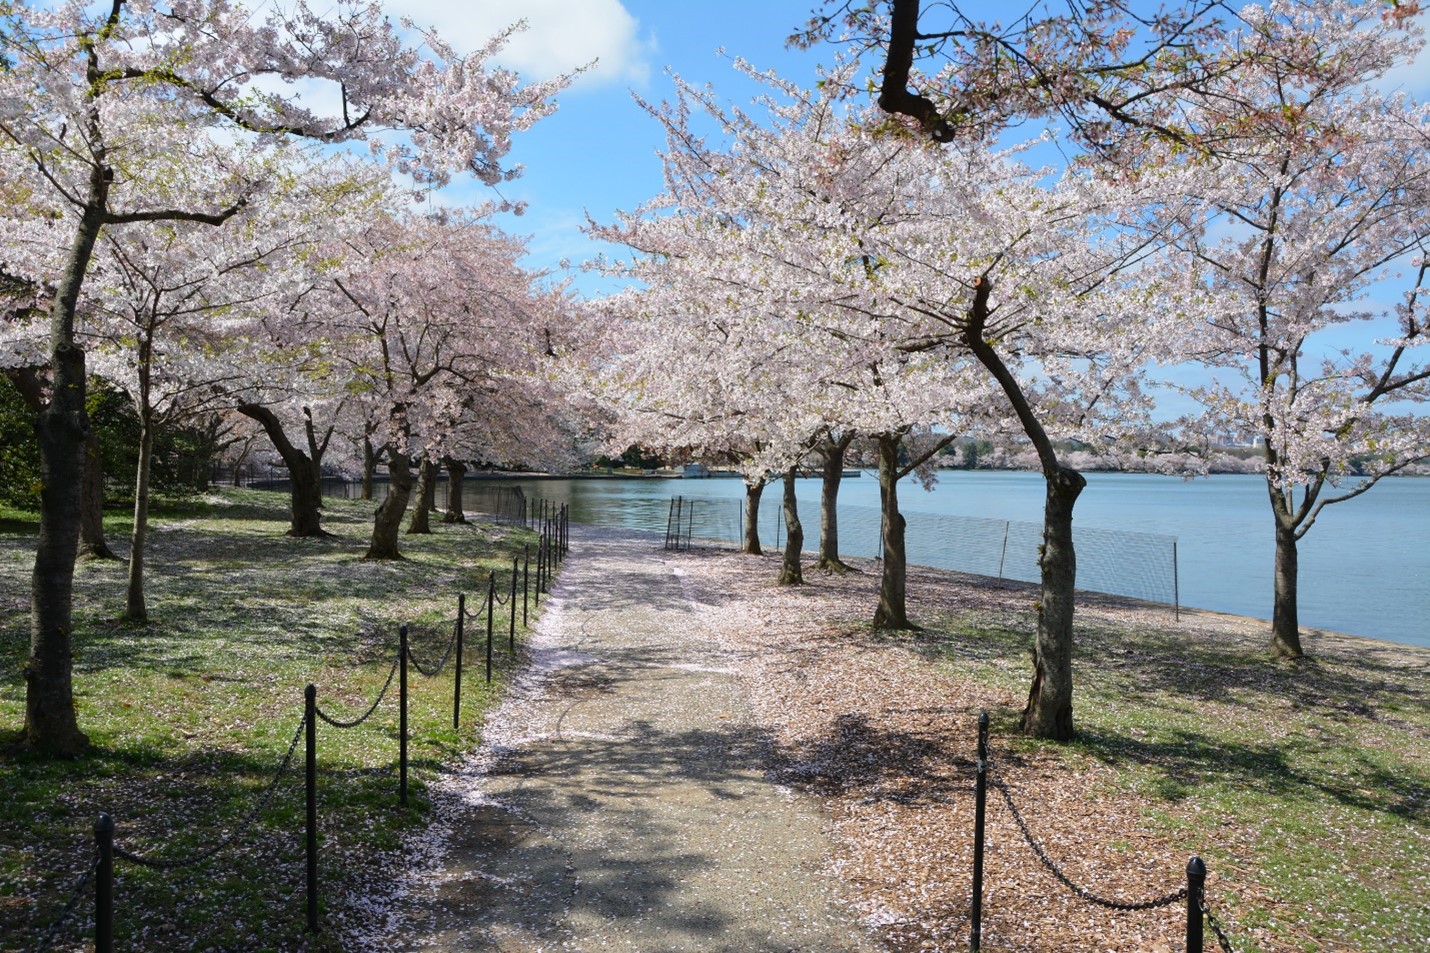 Pathway surrounded by cherry trees, near clear blue water.